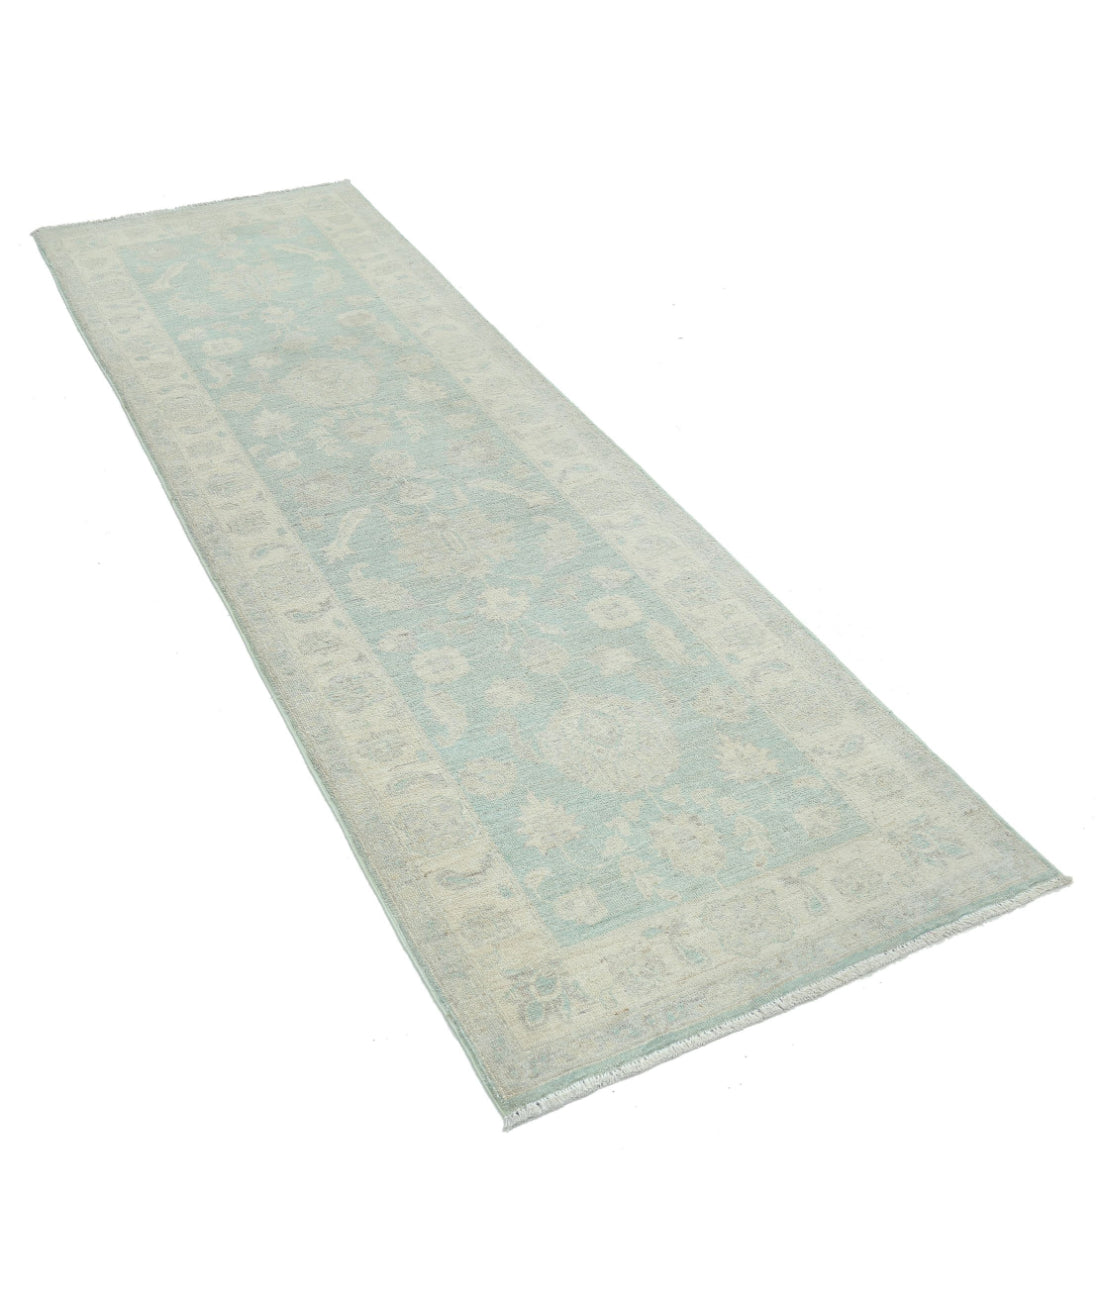 Hand Knotted Serenity Wool Rug - 2'7'' x 8'0'' 2'7'' x 8'0'' (78 X 240) / Green / Ivory